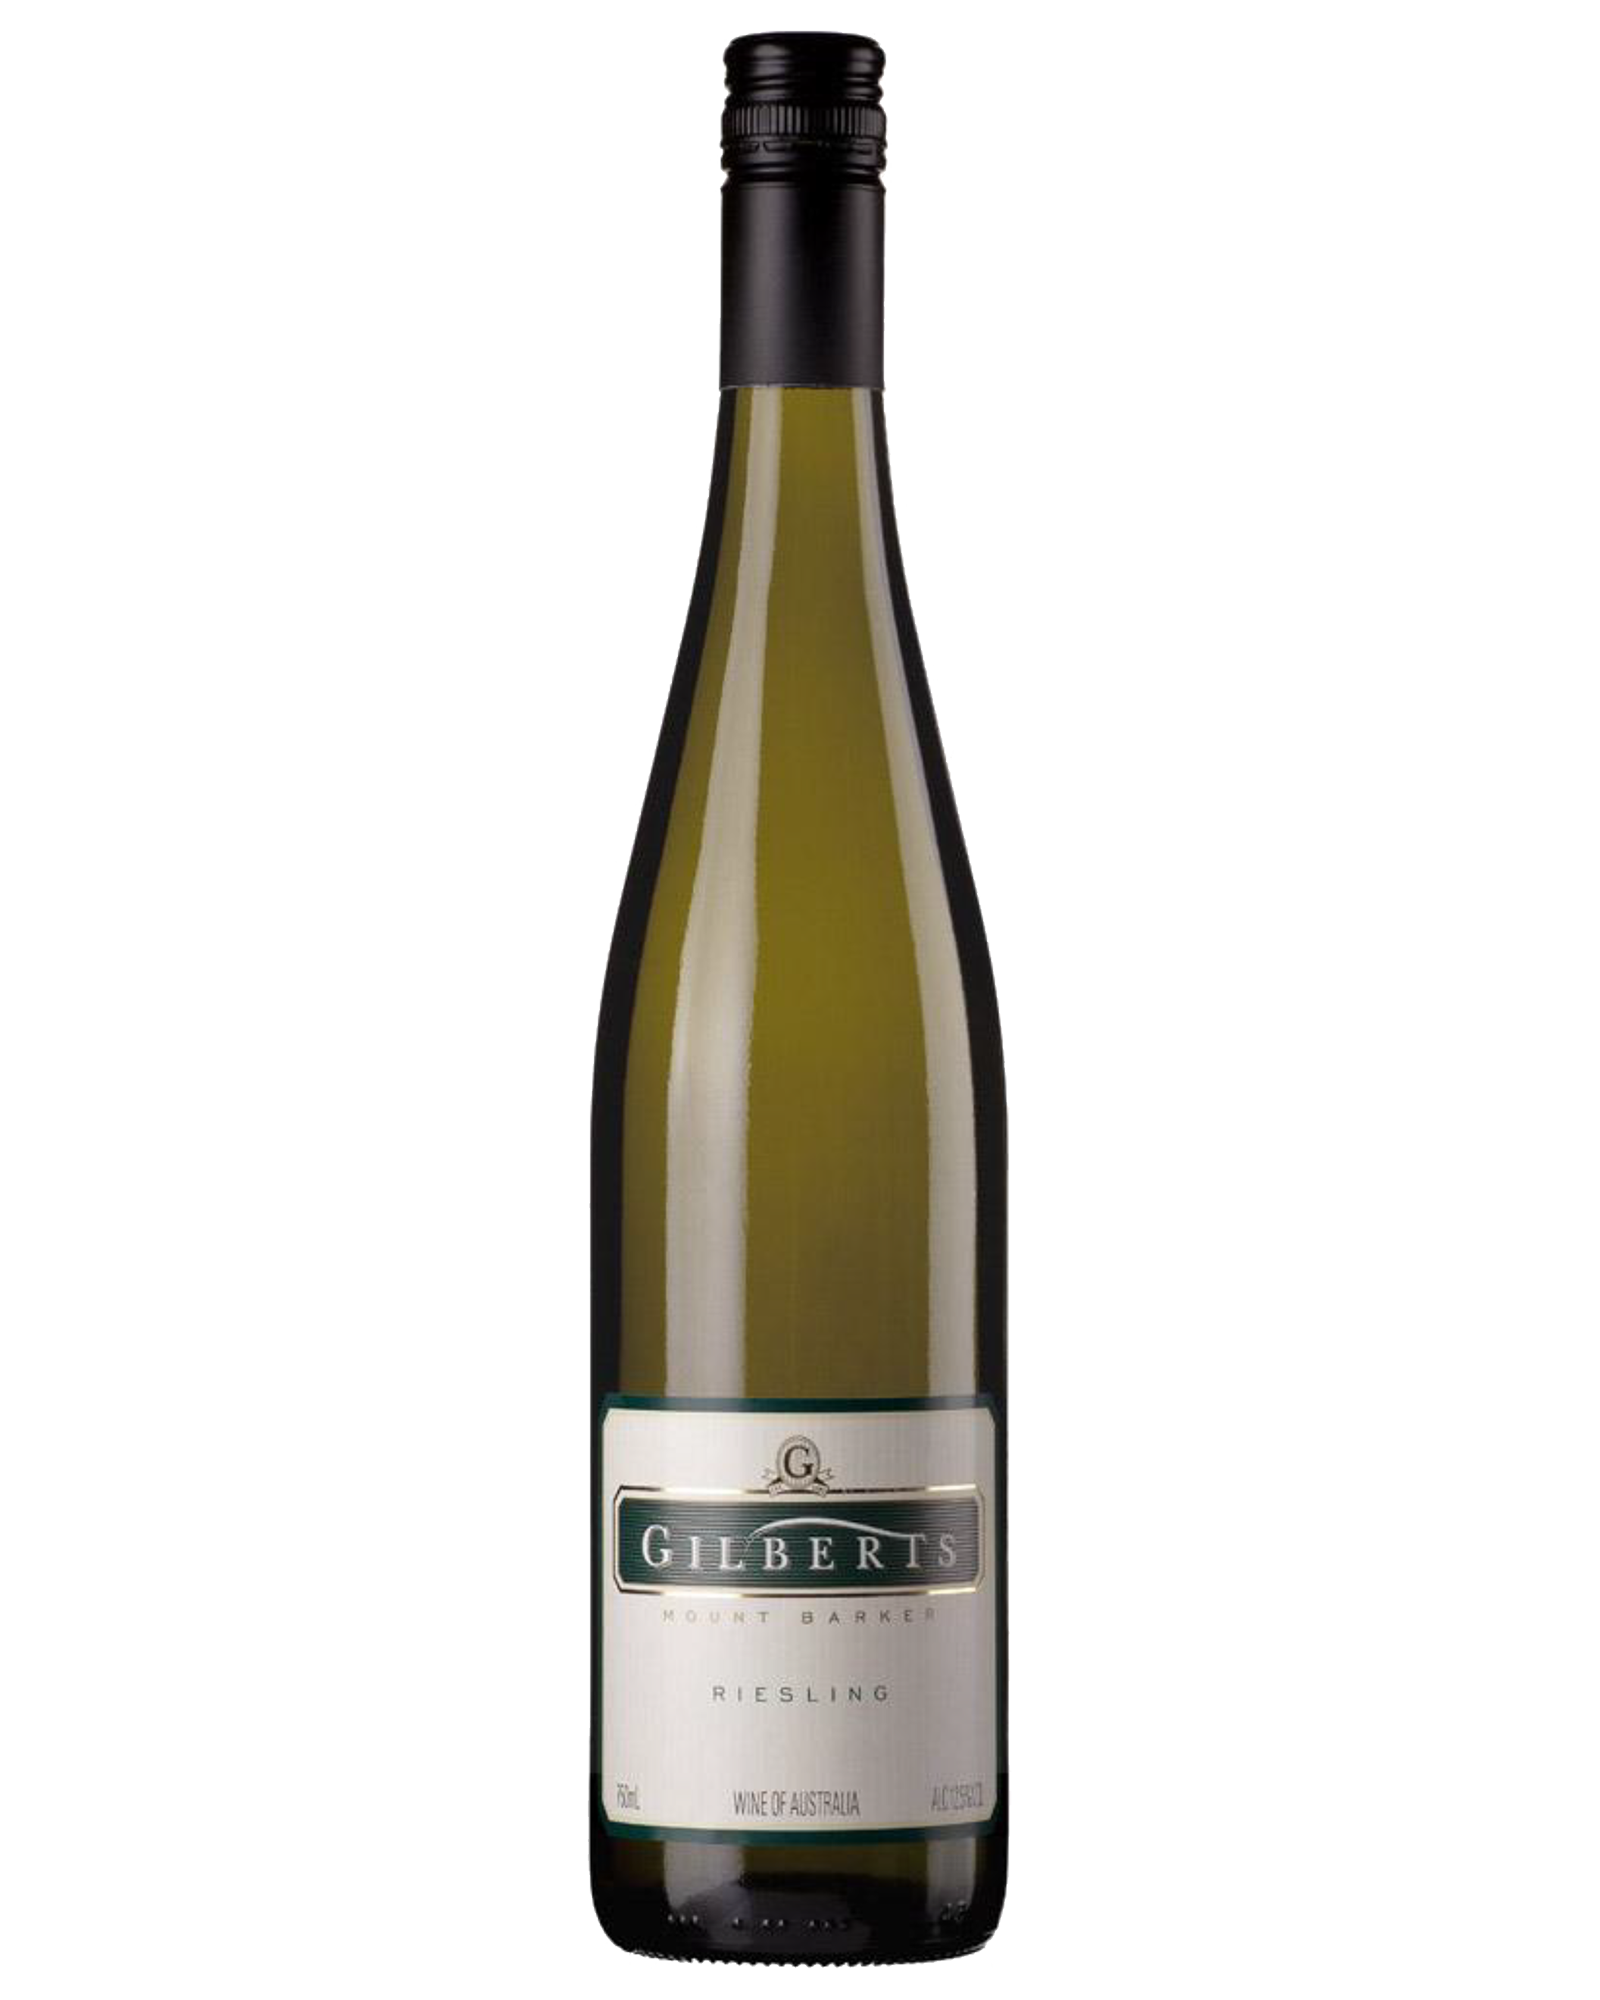 Gilberts Mount Barker Riesling